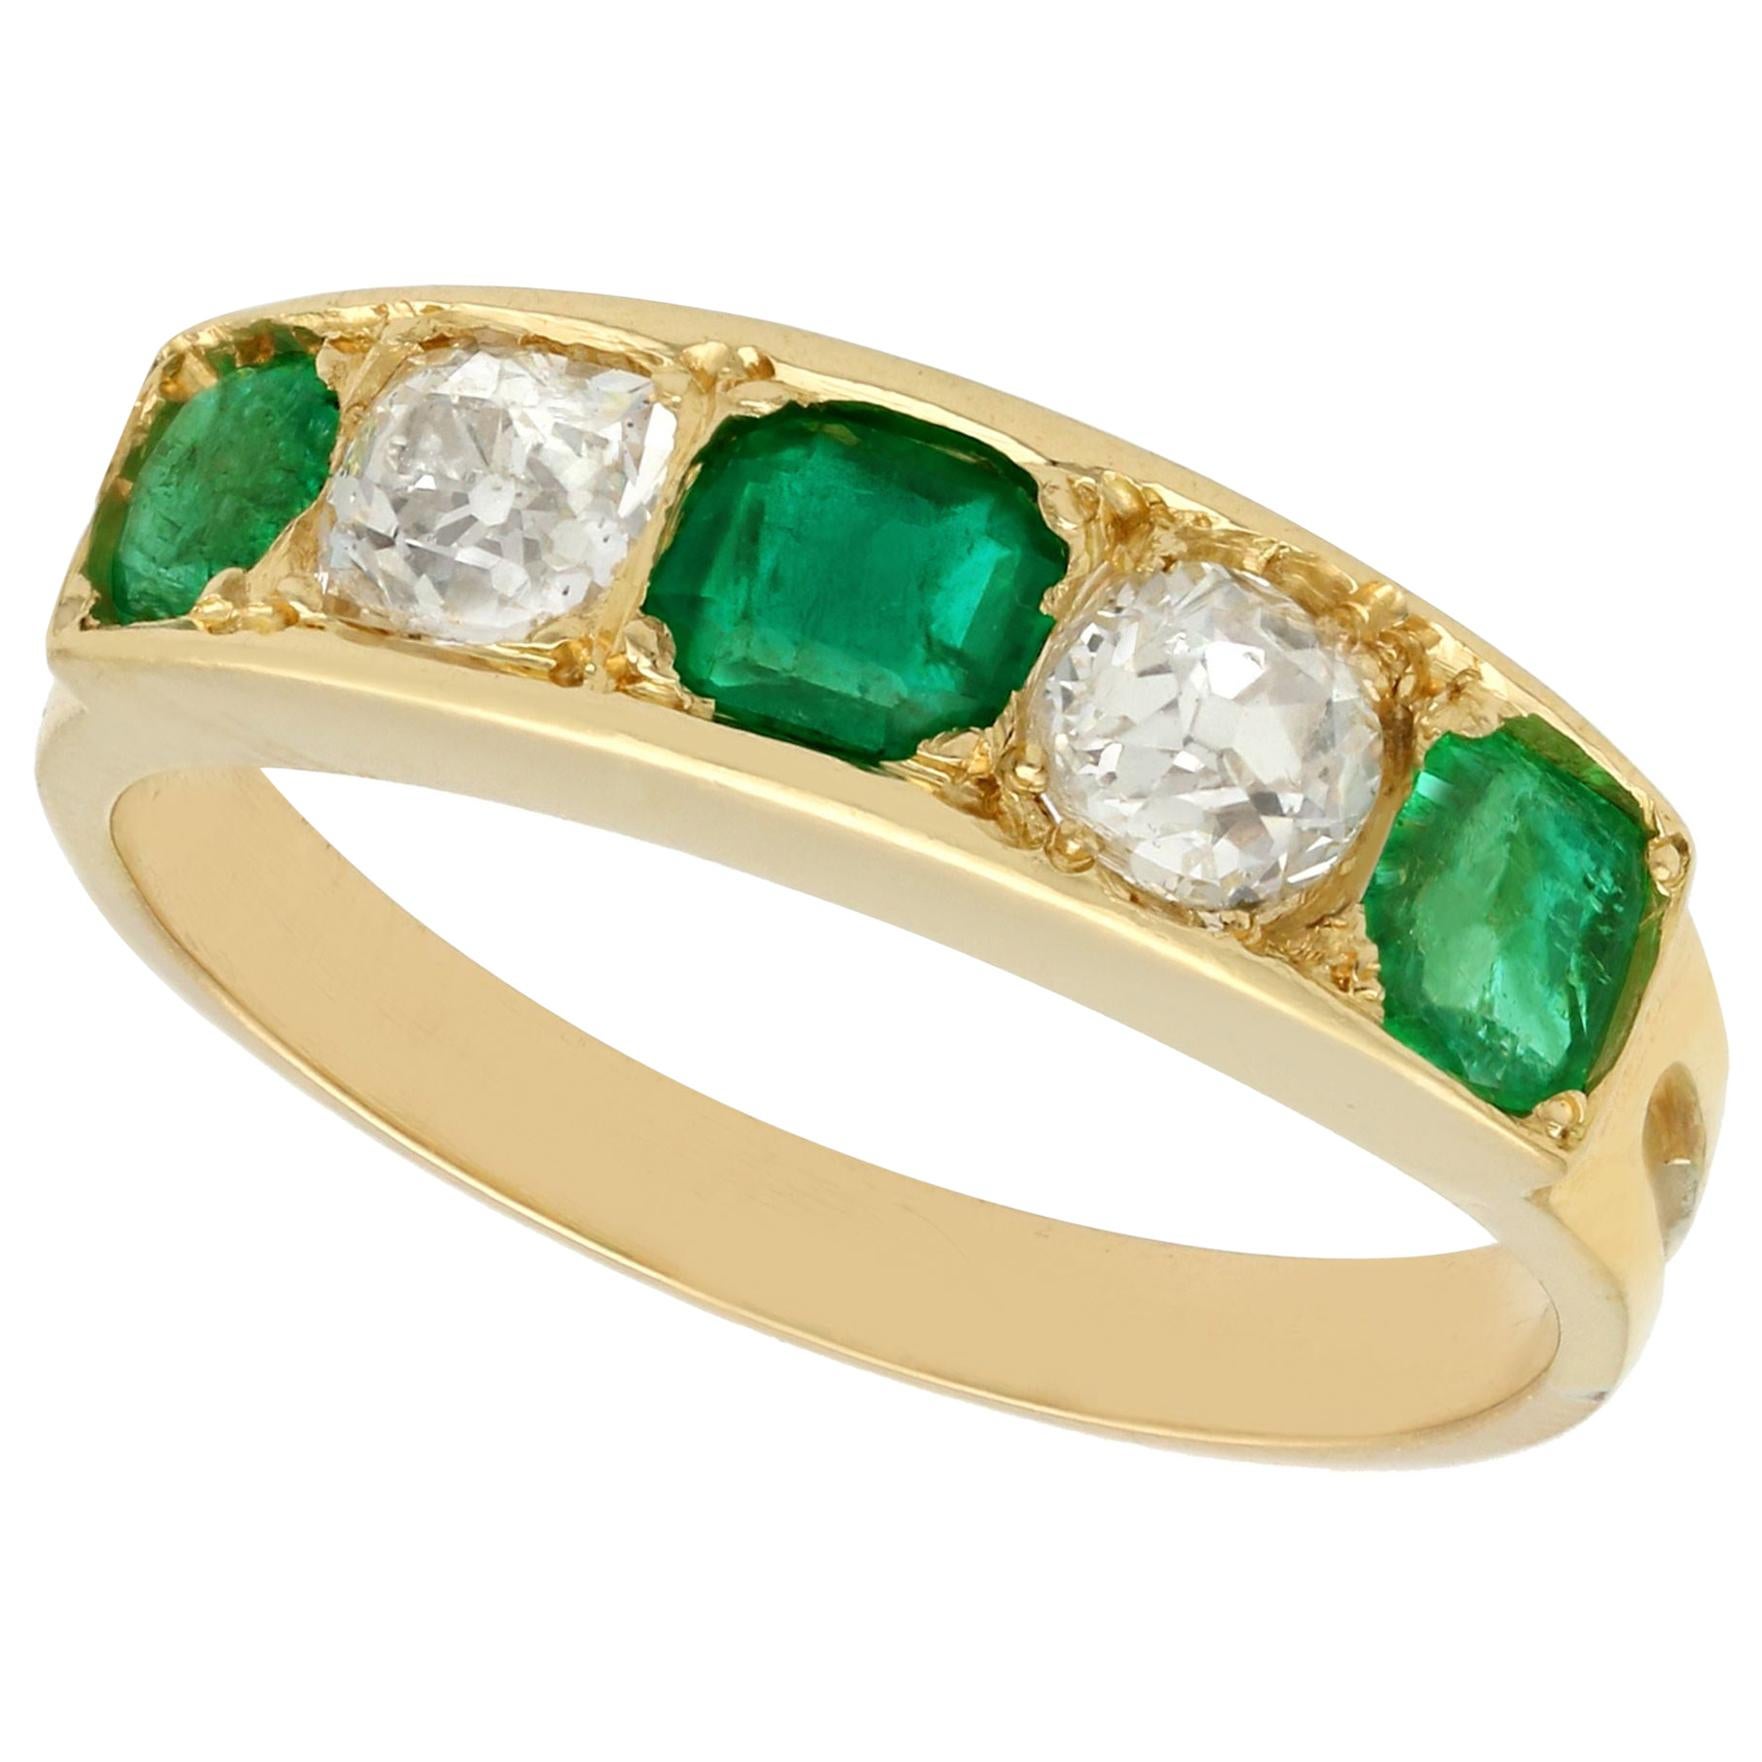 Antique 1920s Emerald and Diamond Yellow Gold Ring